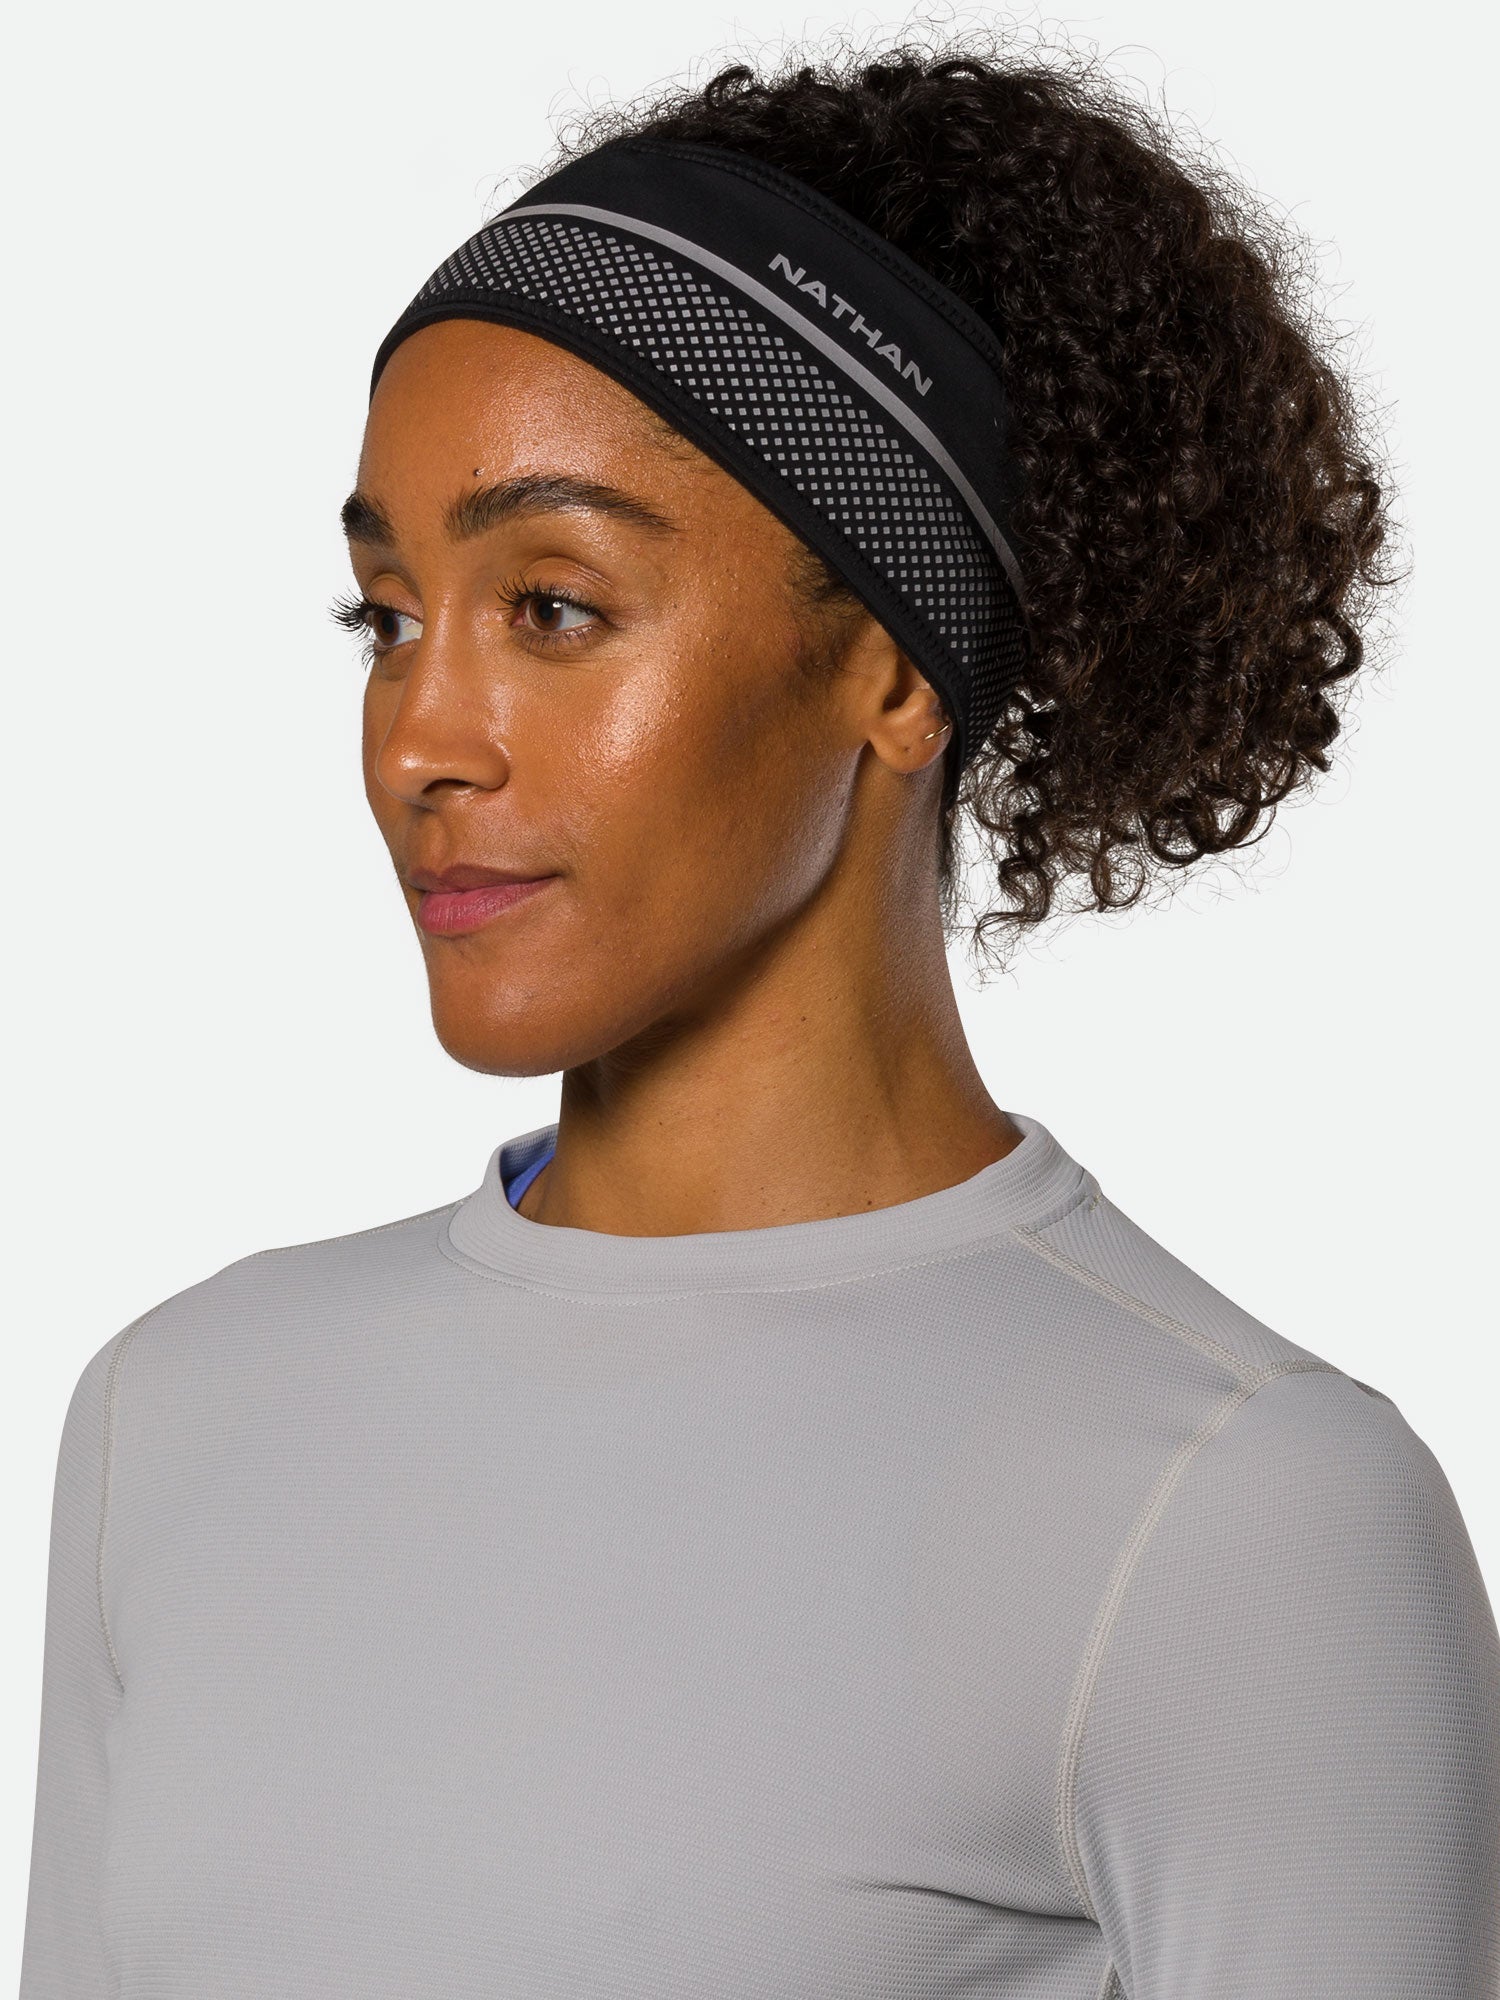 Nathan HyperNight Reflective Safety Headband - Black - On Model - Front View